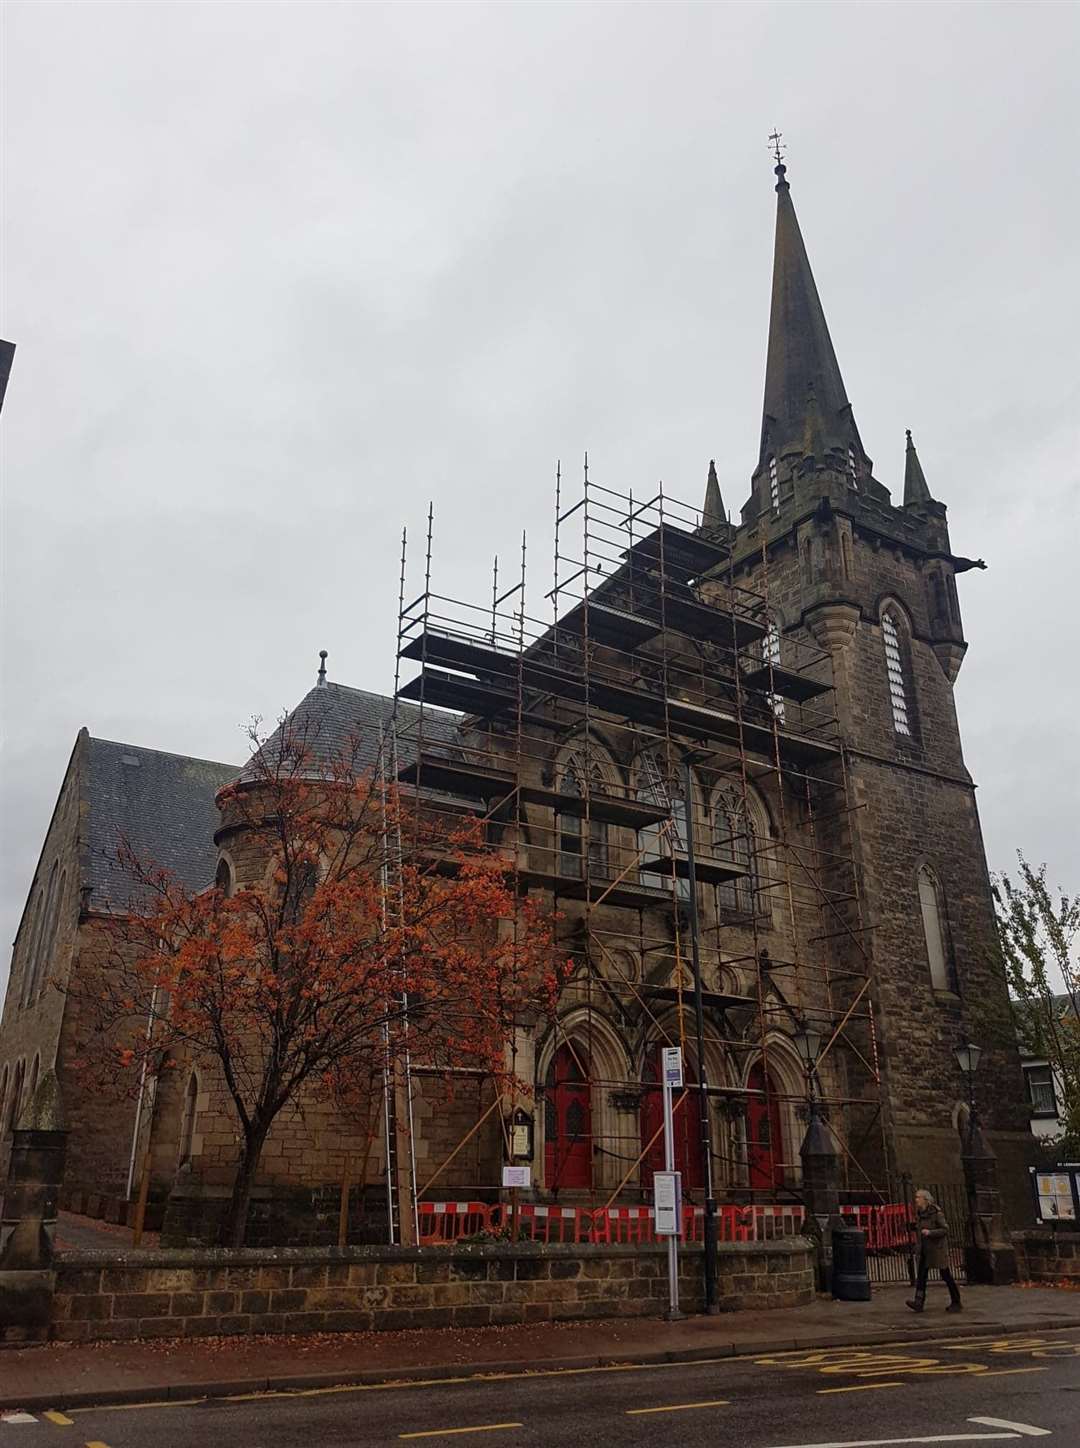 St Leonard’s Church has been open to its congregation and other users despite the work.